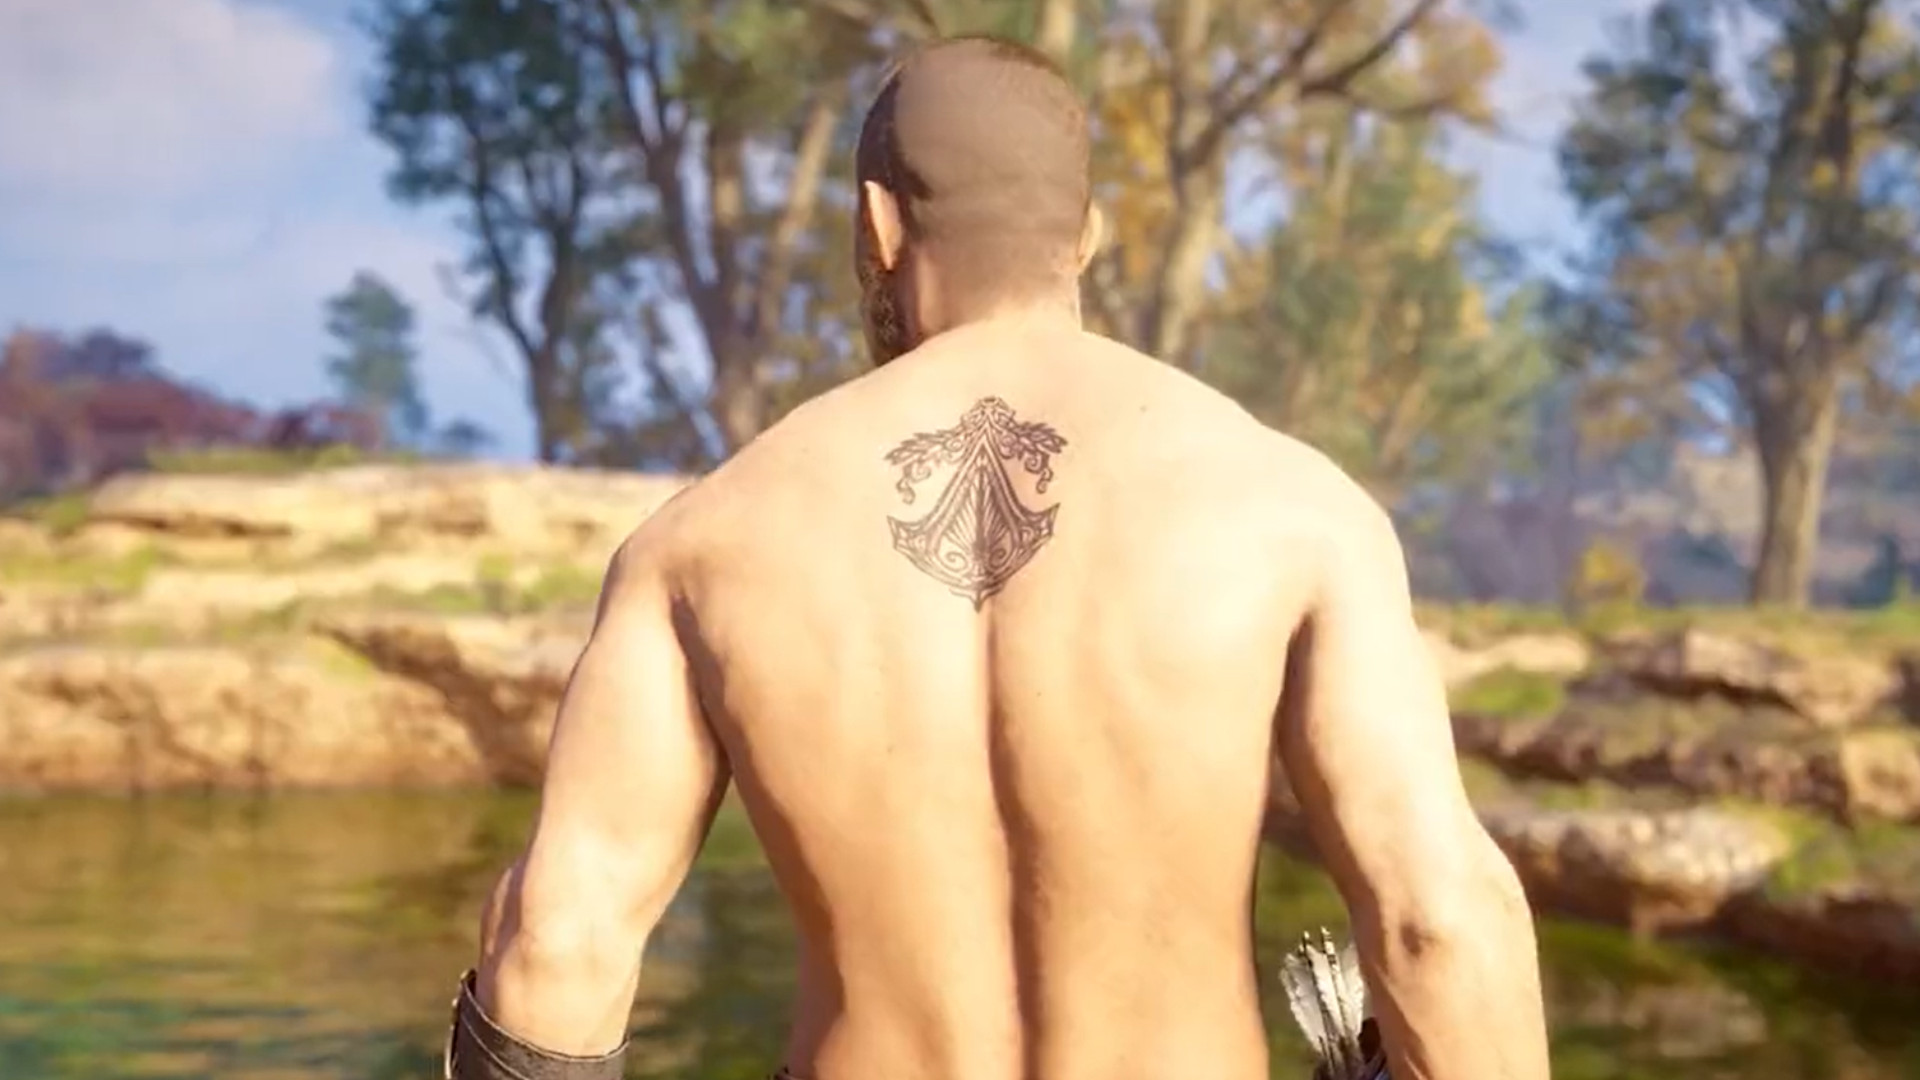 Valhalla gets a tattoo from the best Assassin’s Creed